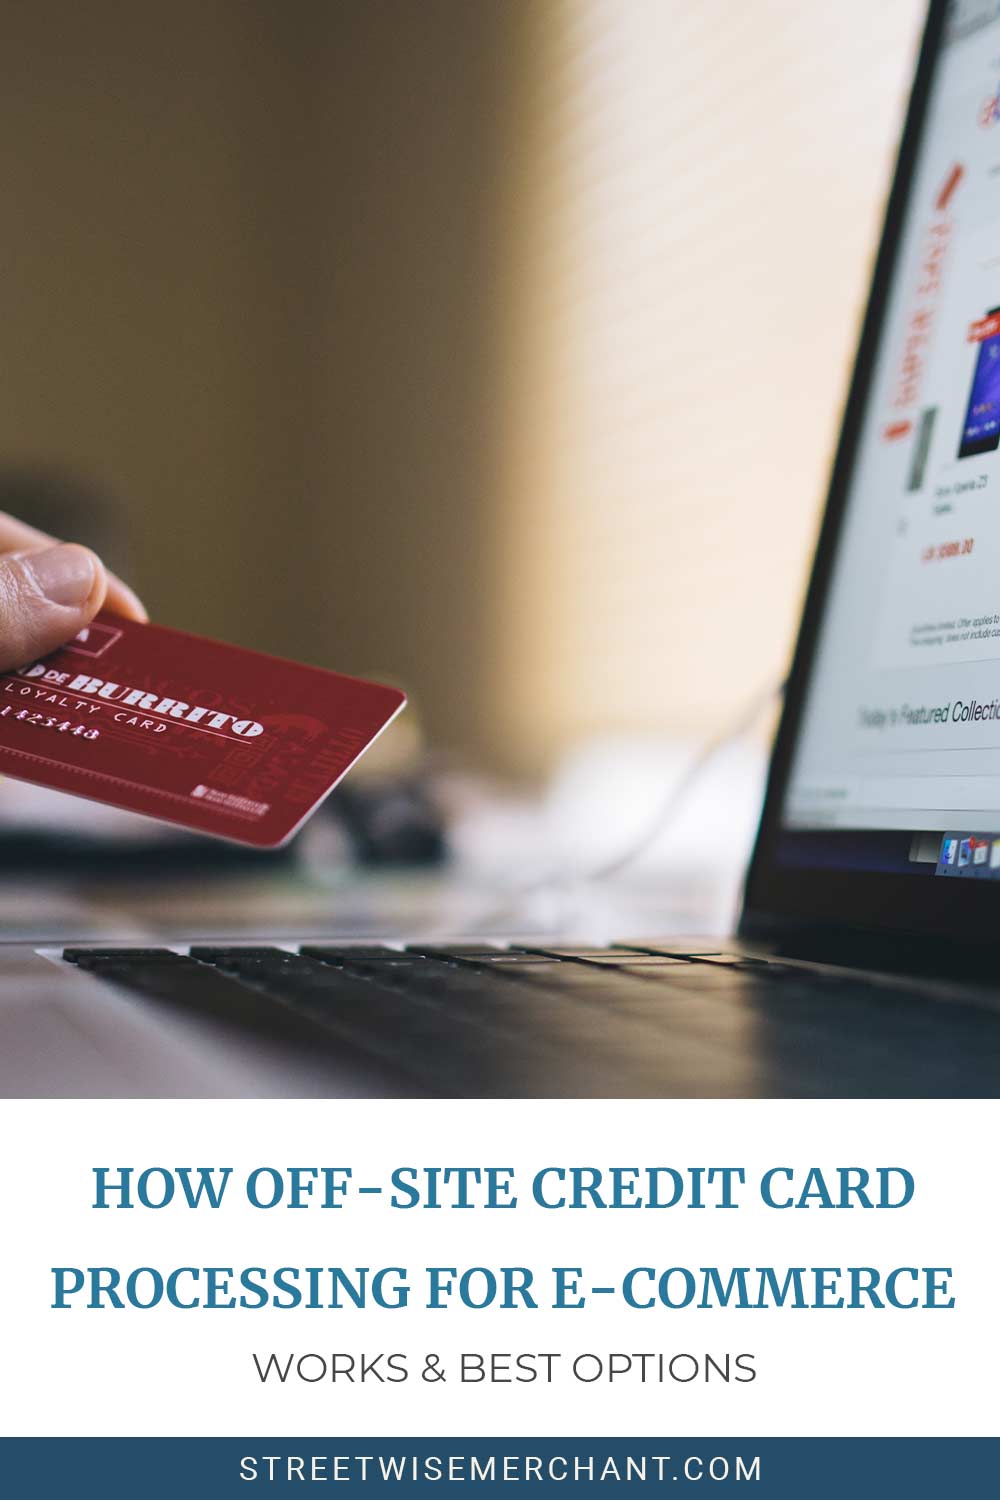 How Off-Site Credit Card Processing for E-commerce Works & Best Options